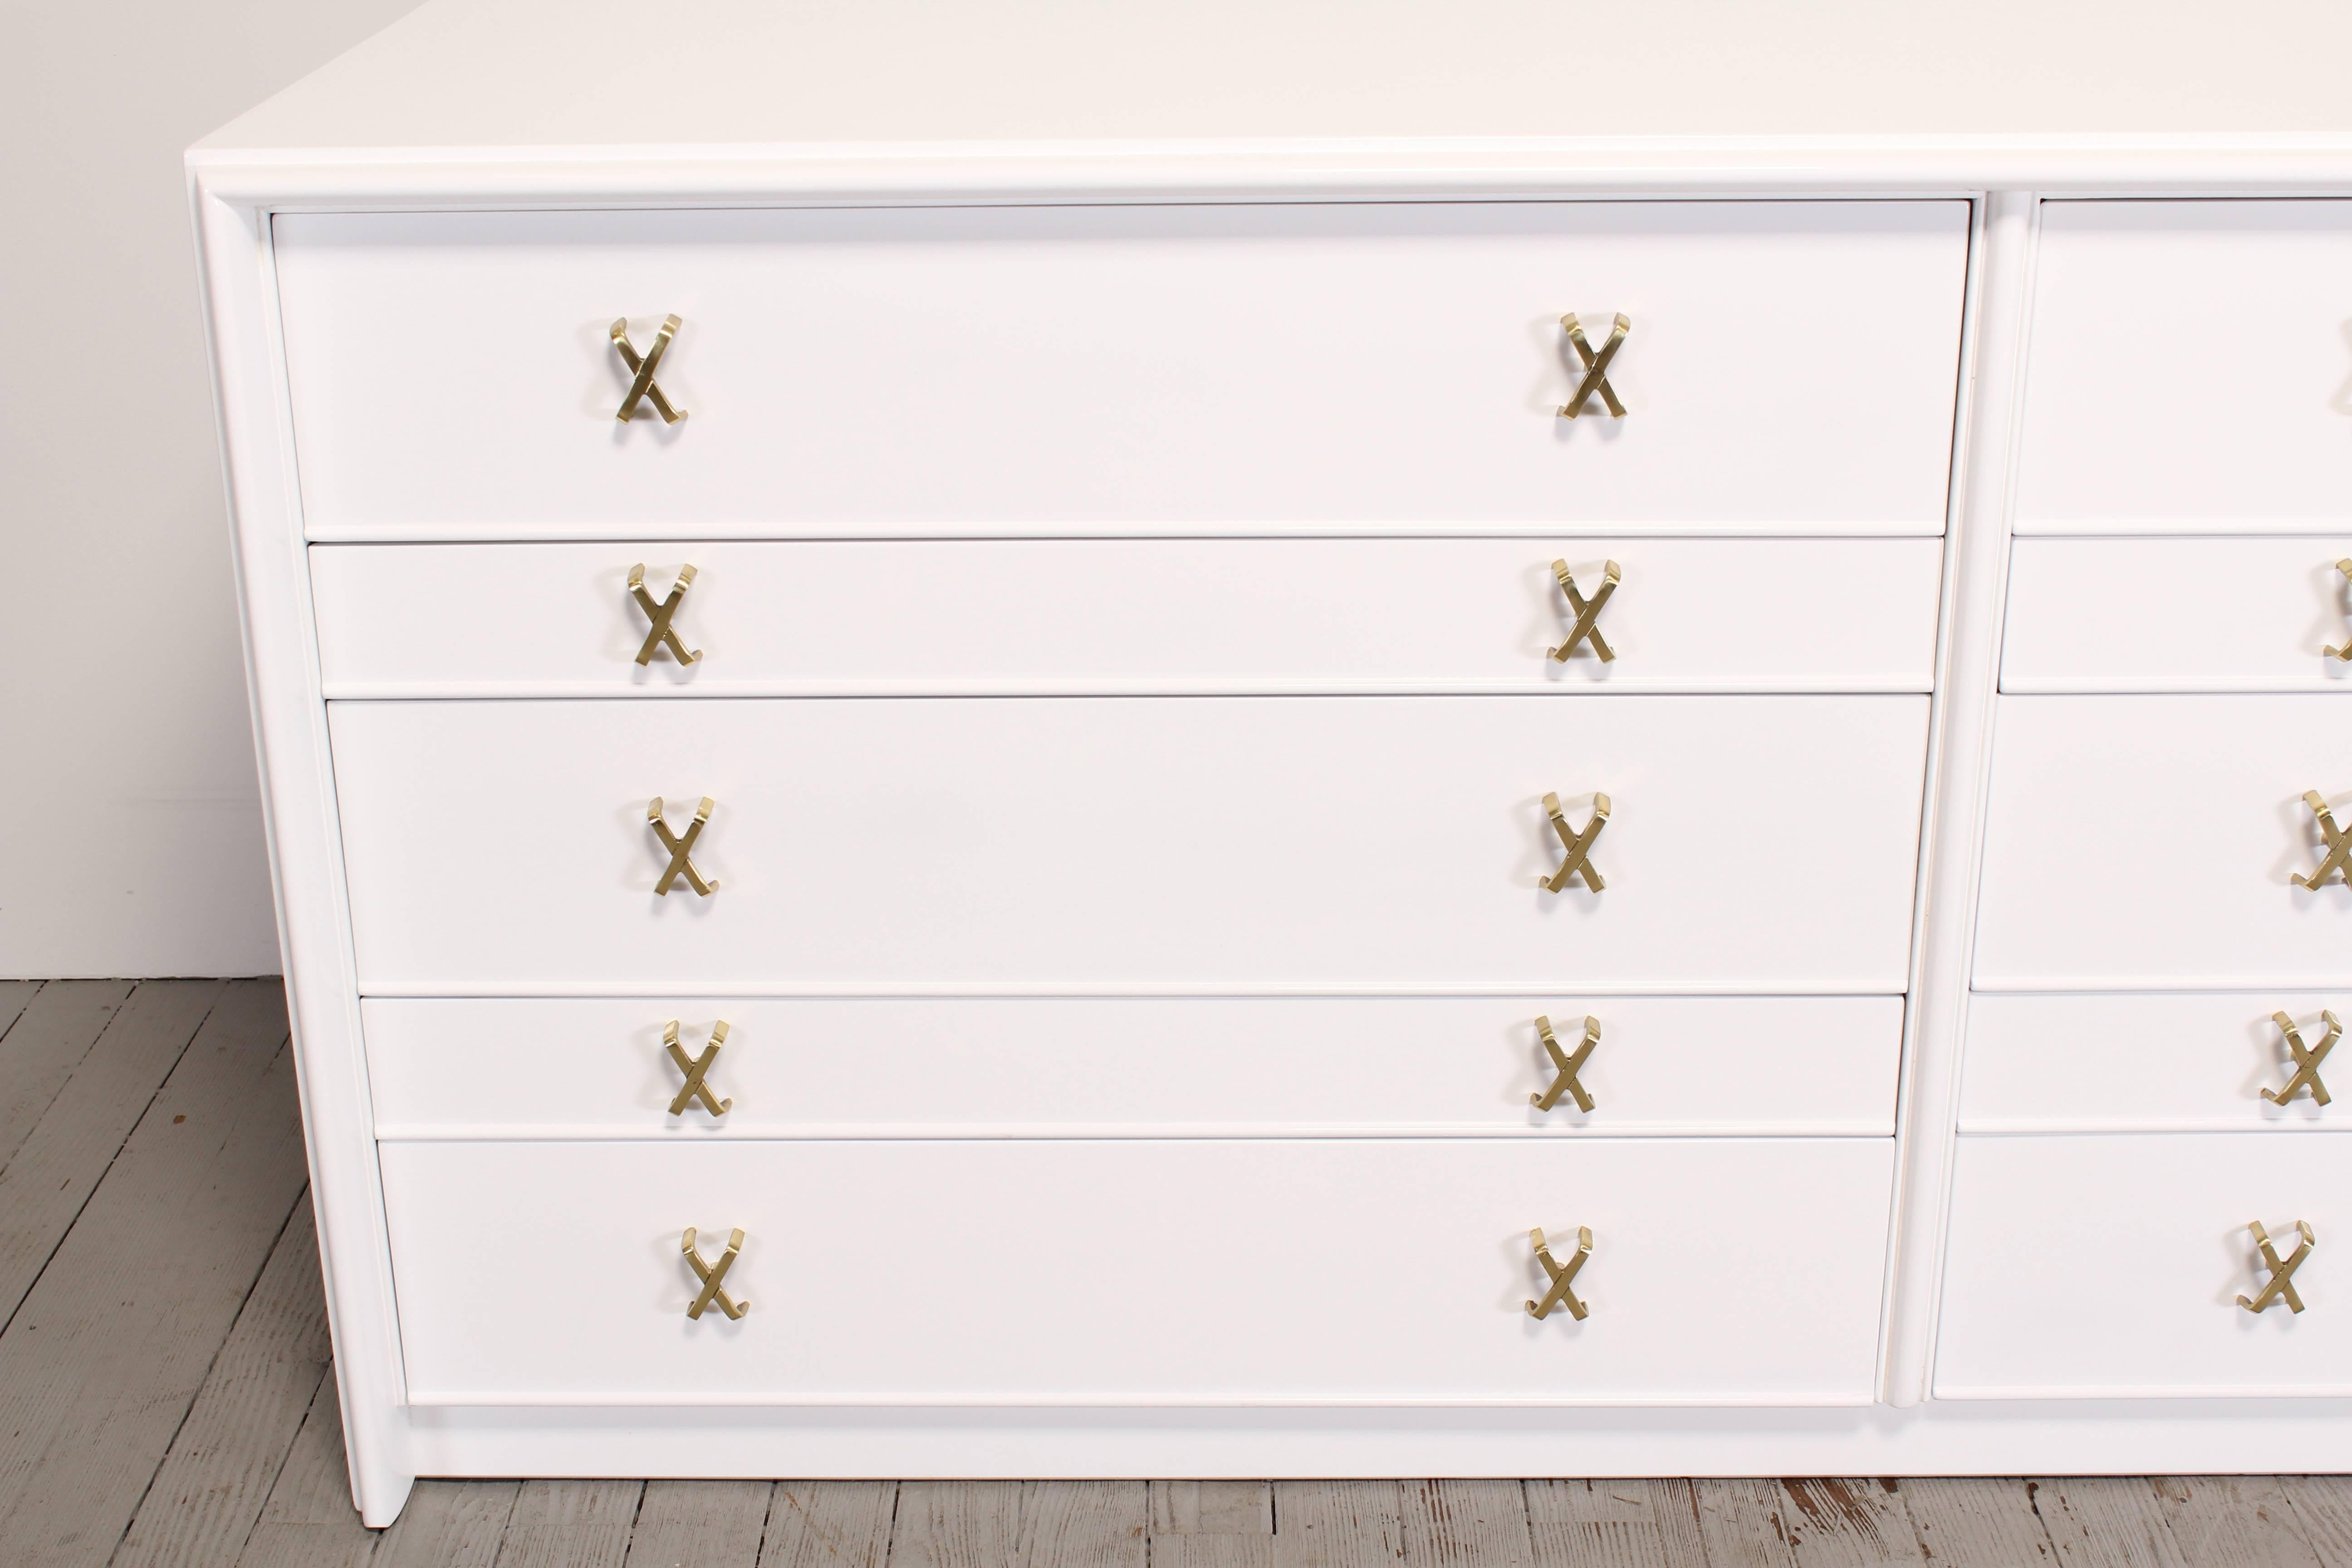 Mid-Century Modern Ten-Drawer Dresser with Brass X Pulls by Paul Frankl for Johnson Furniture Co.